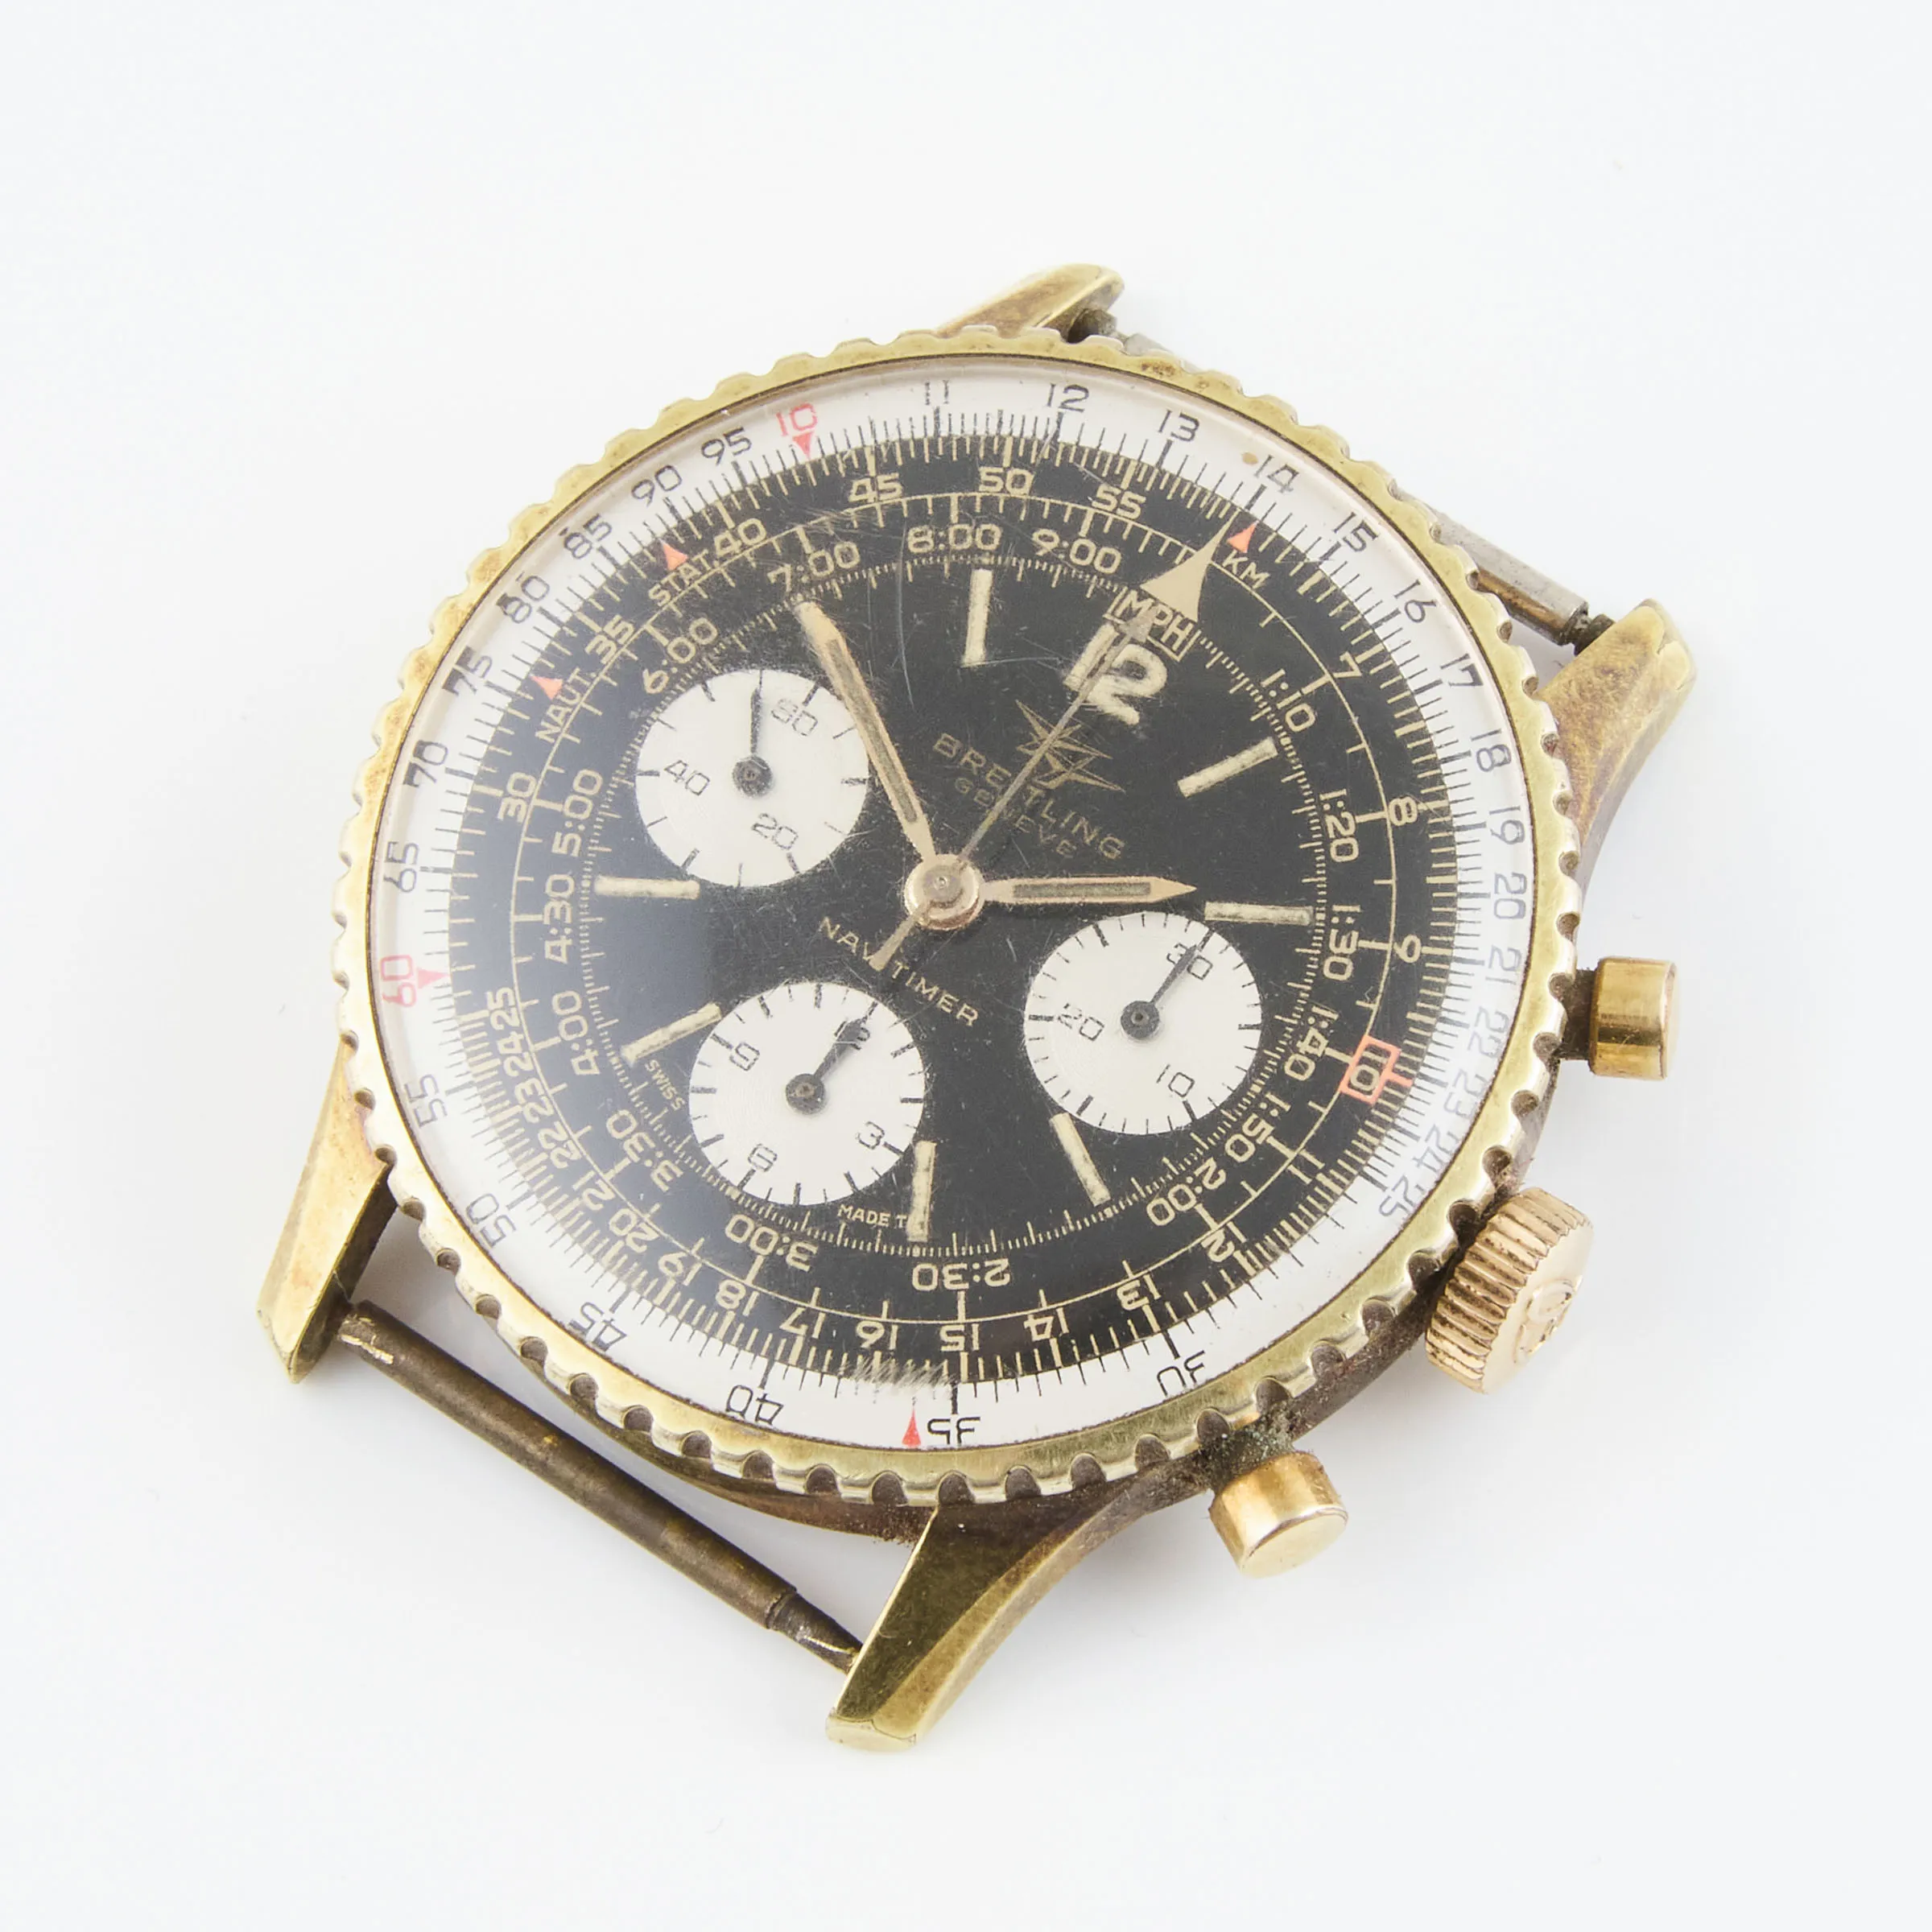 Breitling Navitimer 806 40mm Gold-filled and stainless steel